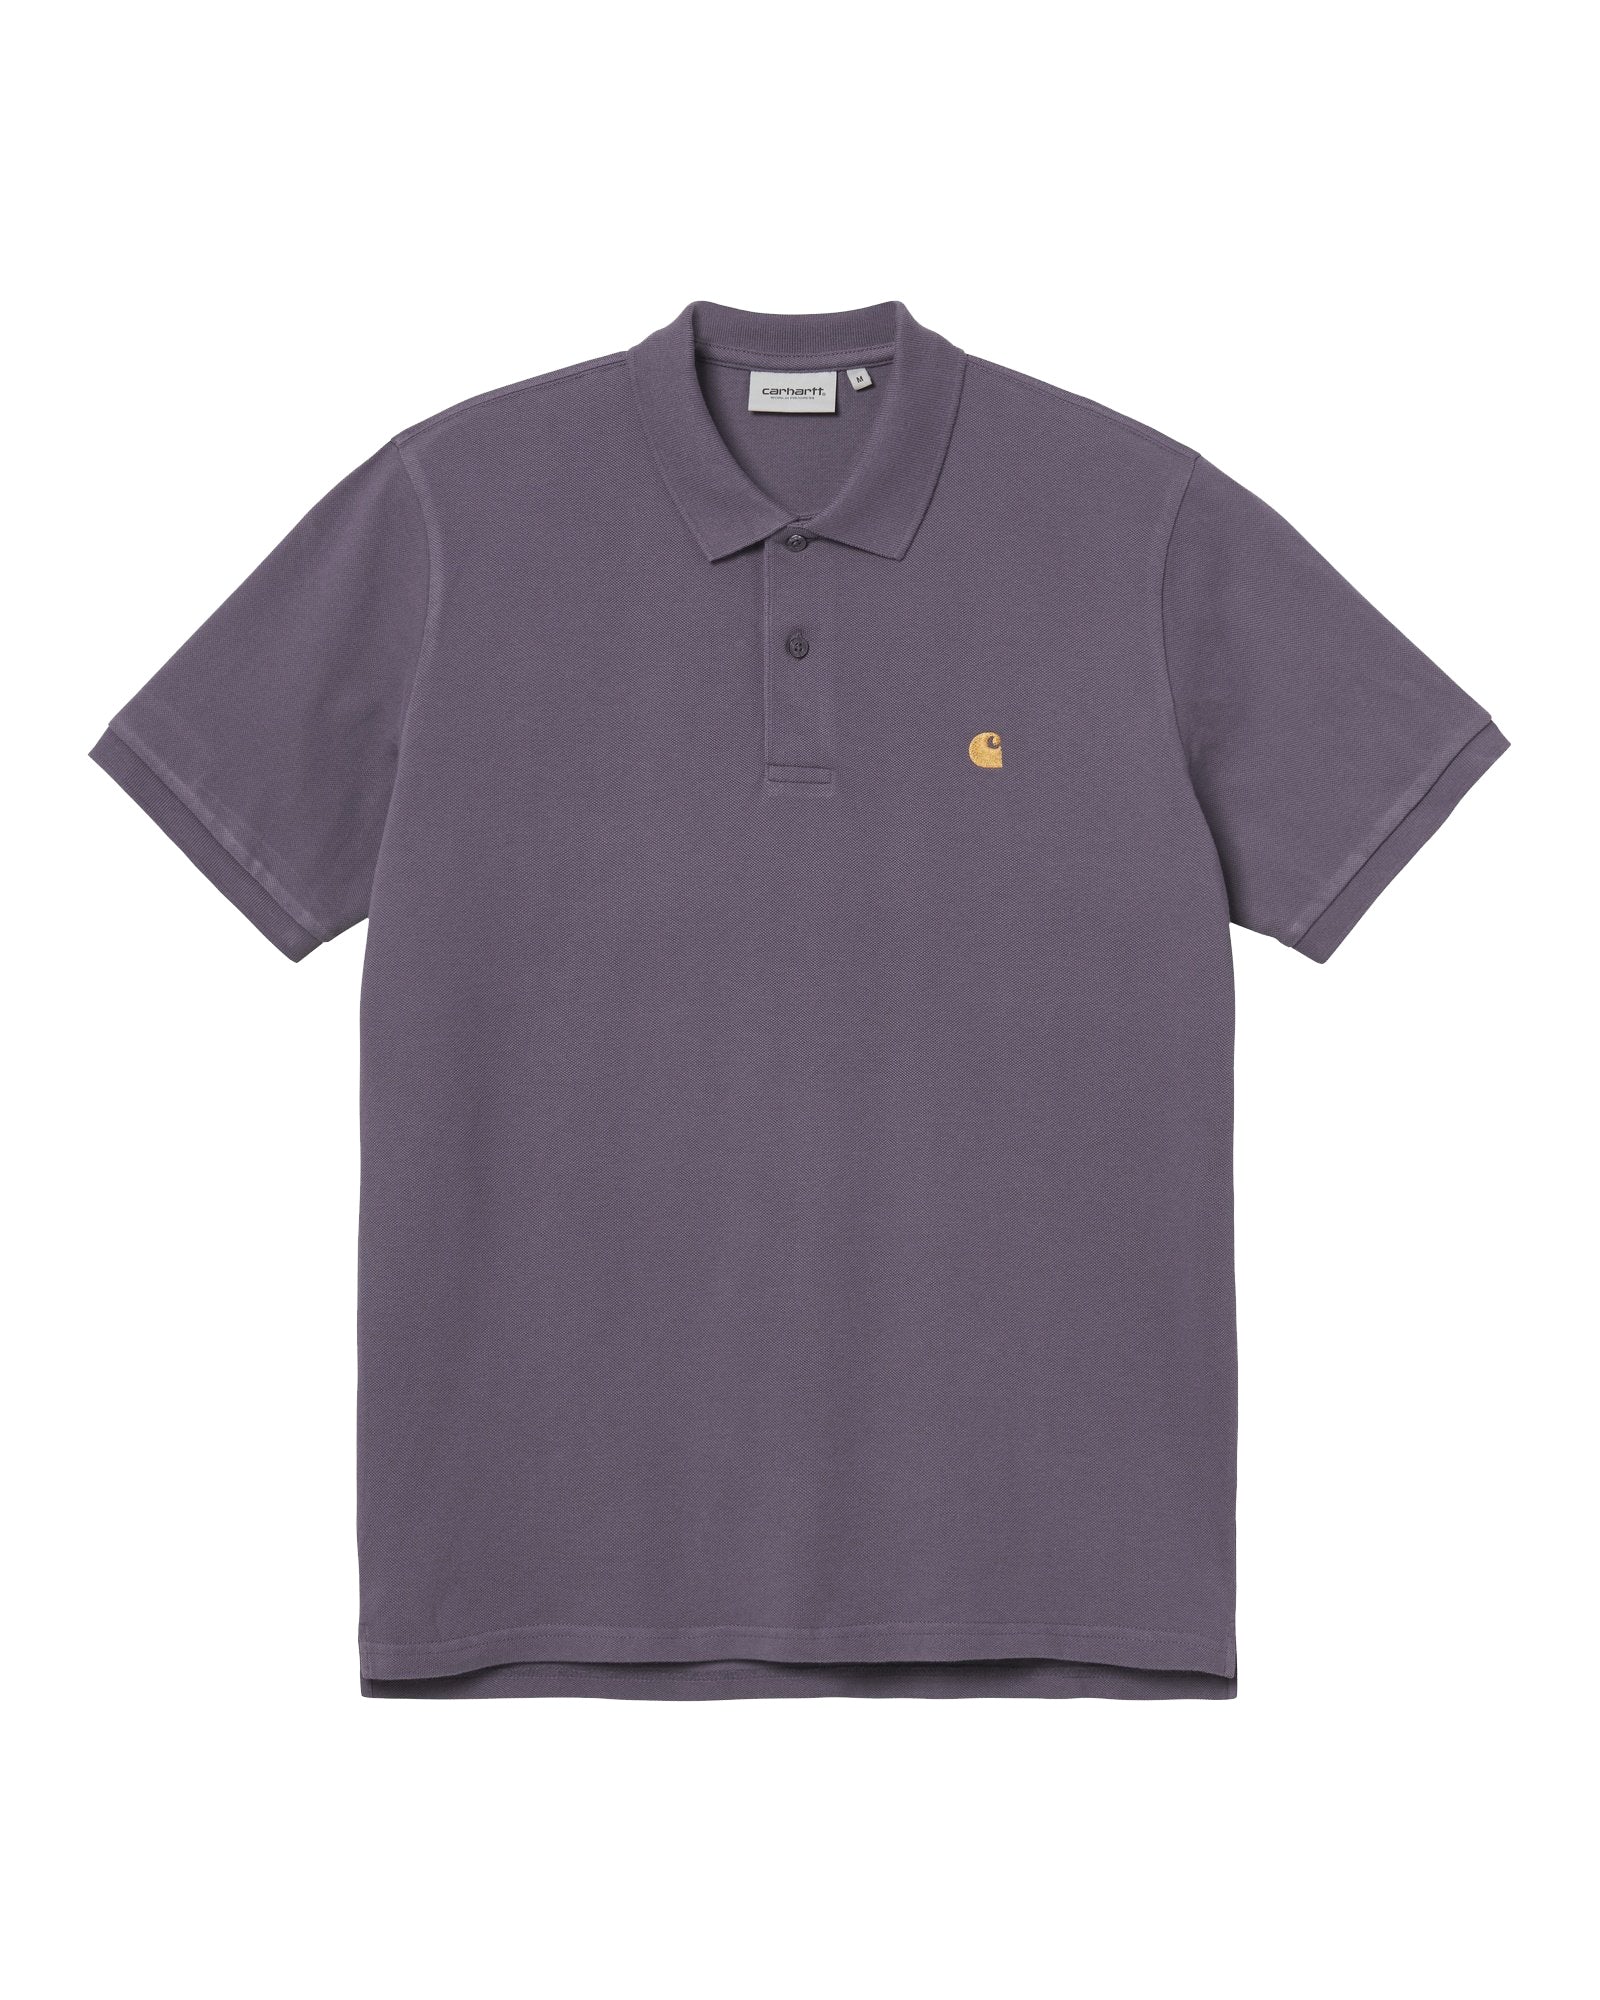 S/S Chase Pique Polo – Stomping Ground